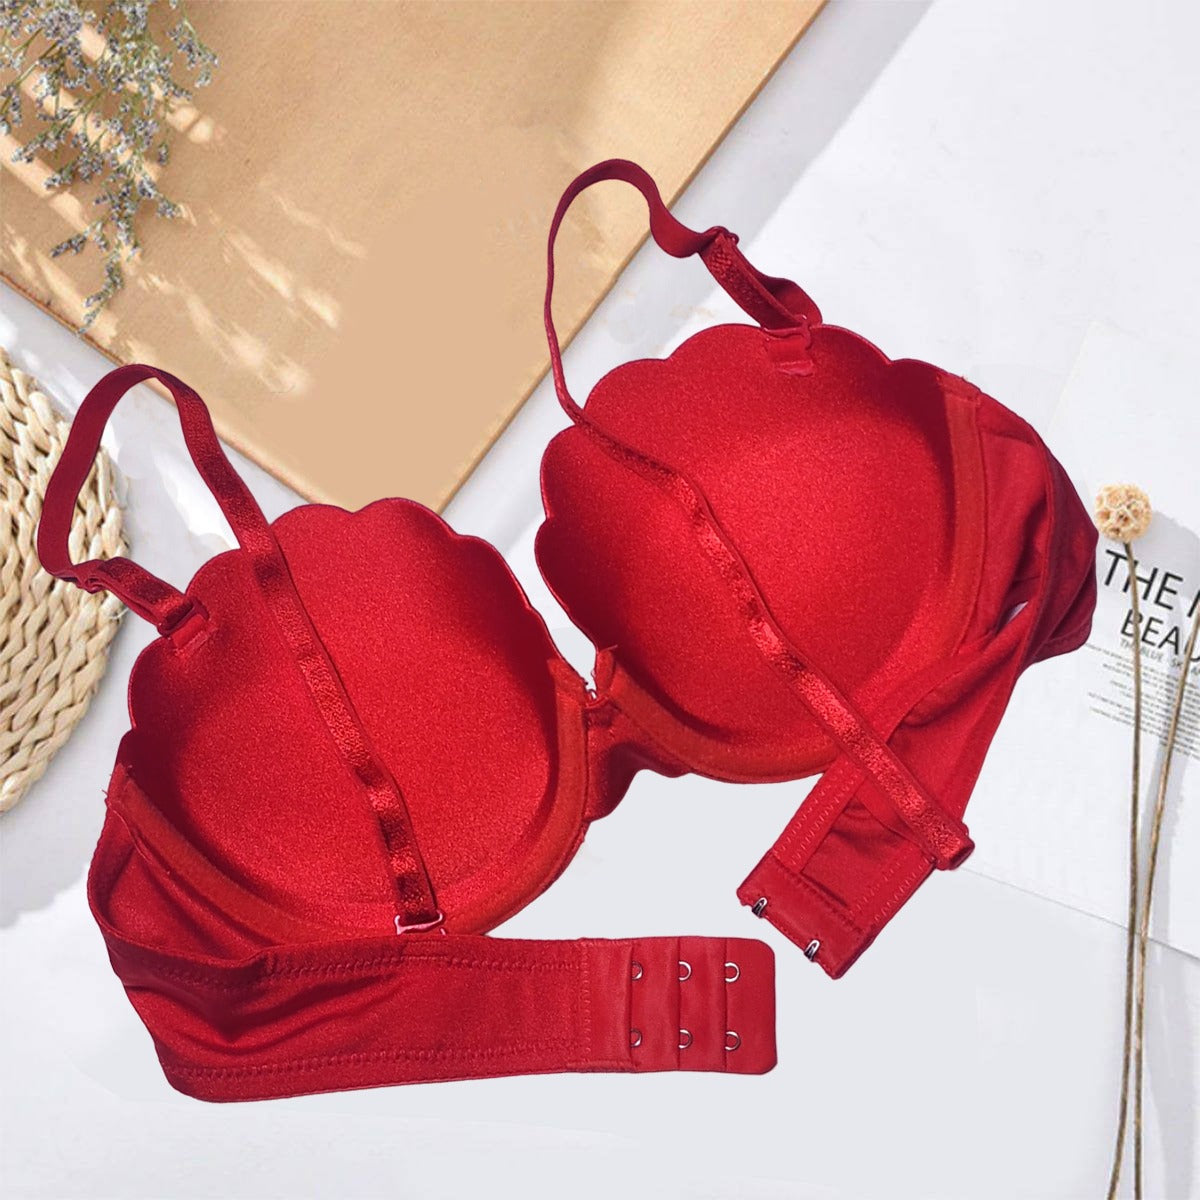 NEW ARRIVALS Flourish High Quality Adjustable Straps Double Padded Hand Push  Up Bridal Bra 8831 Size : 32 , 34 , 36 , 38 Cup Size : A a